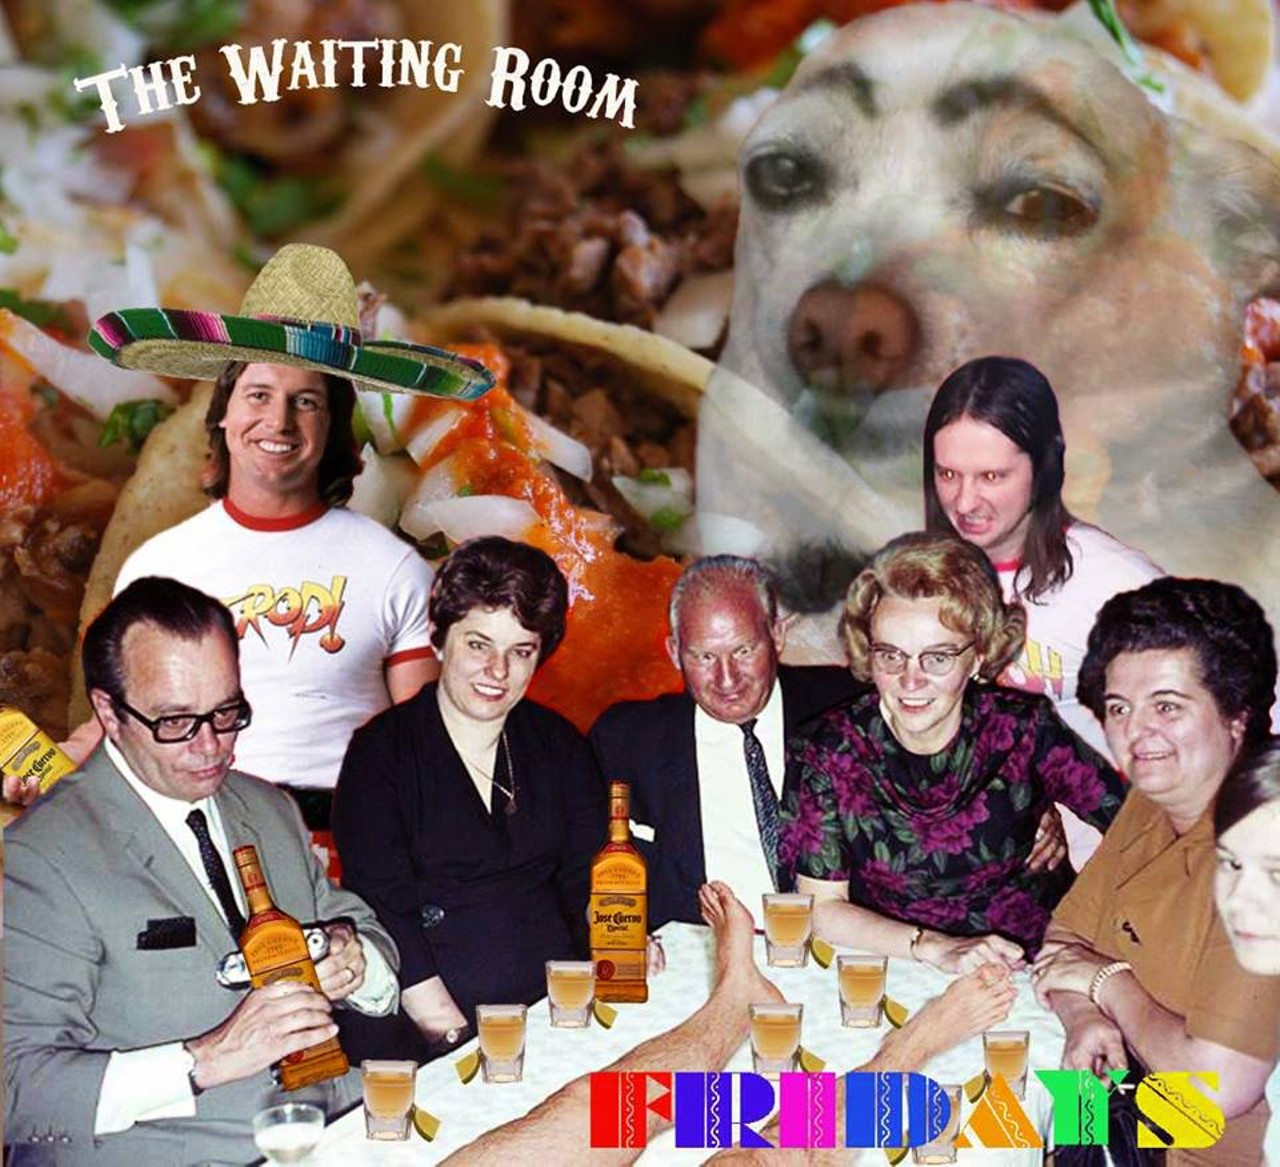 The Waiting Room's Promo Art Is Totally Insane, and Also Amazing